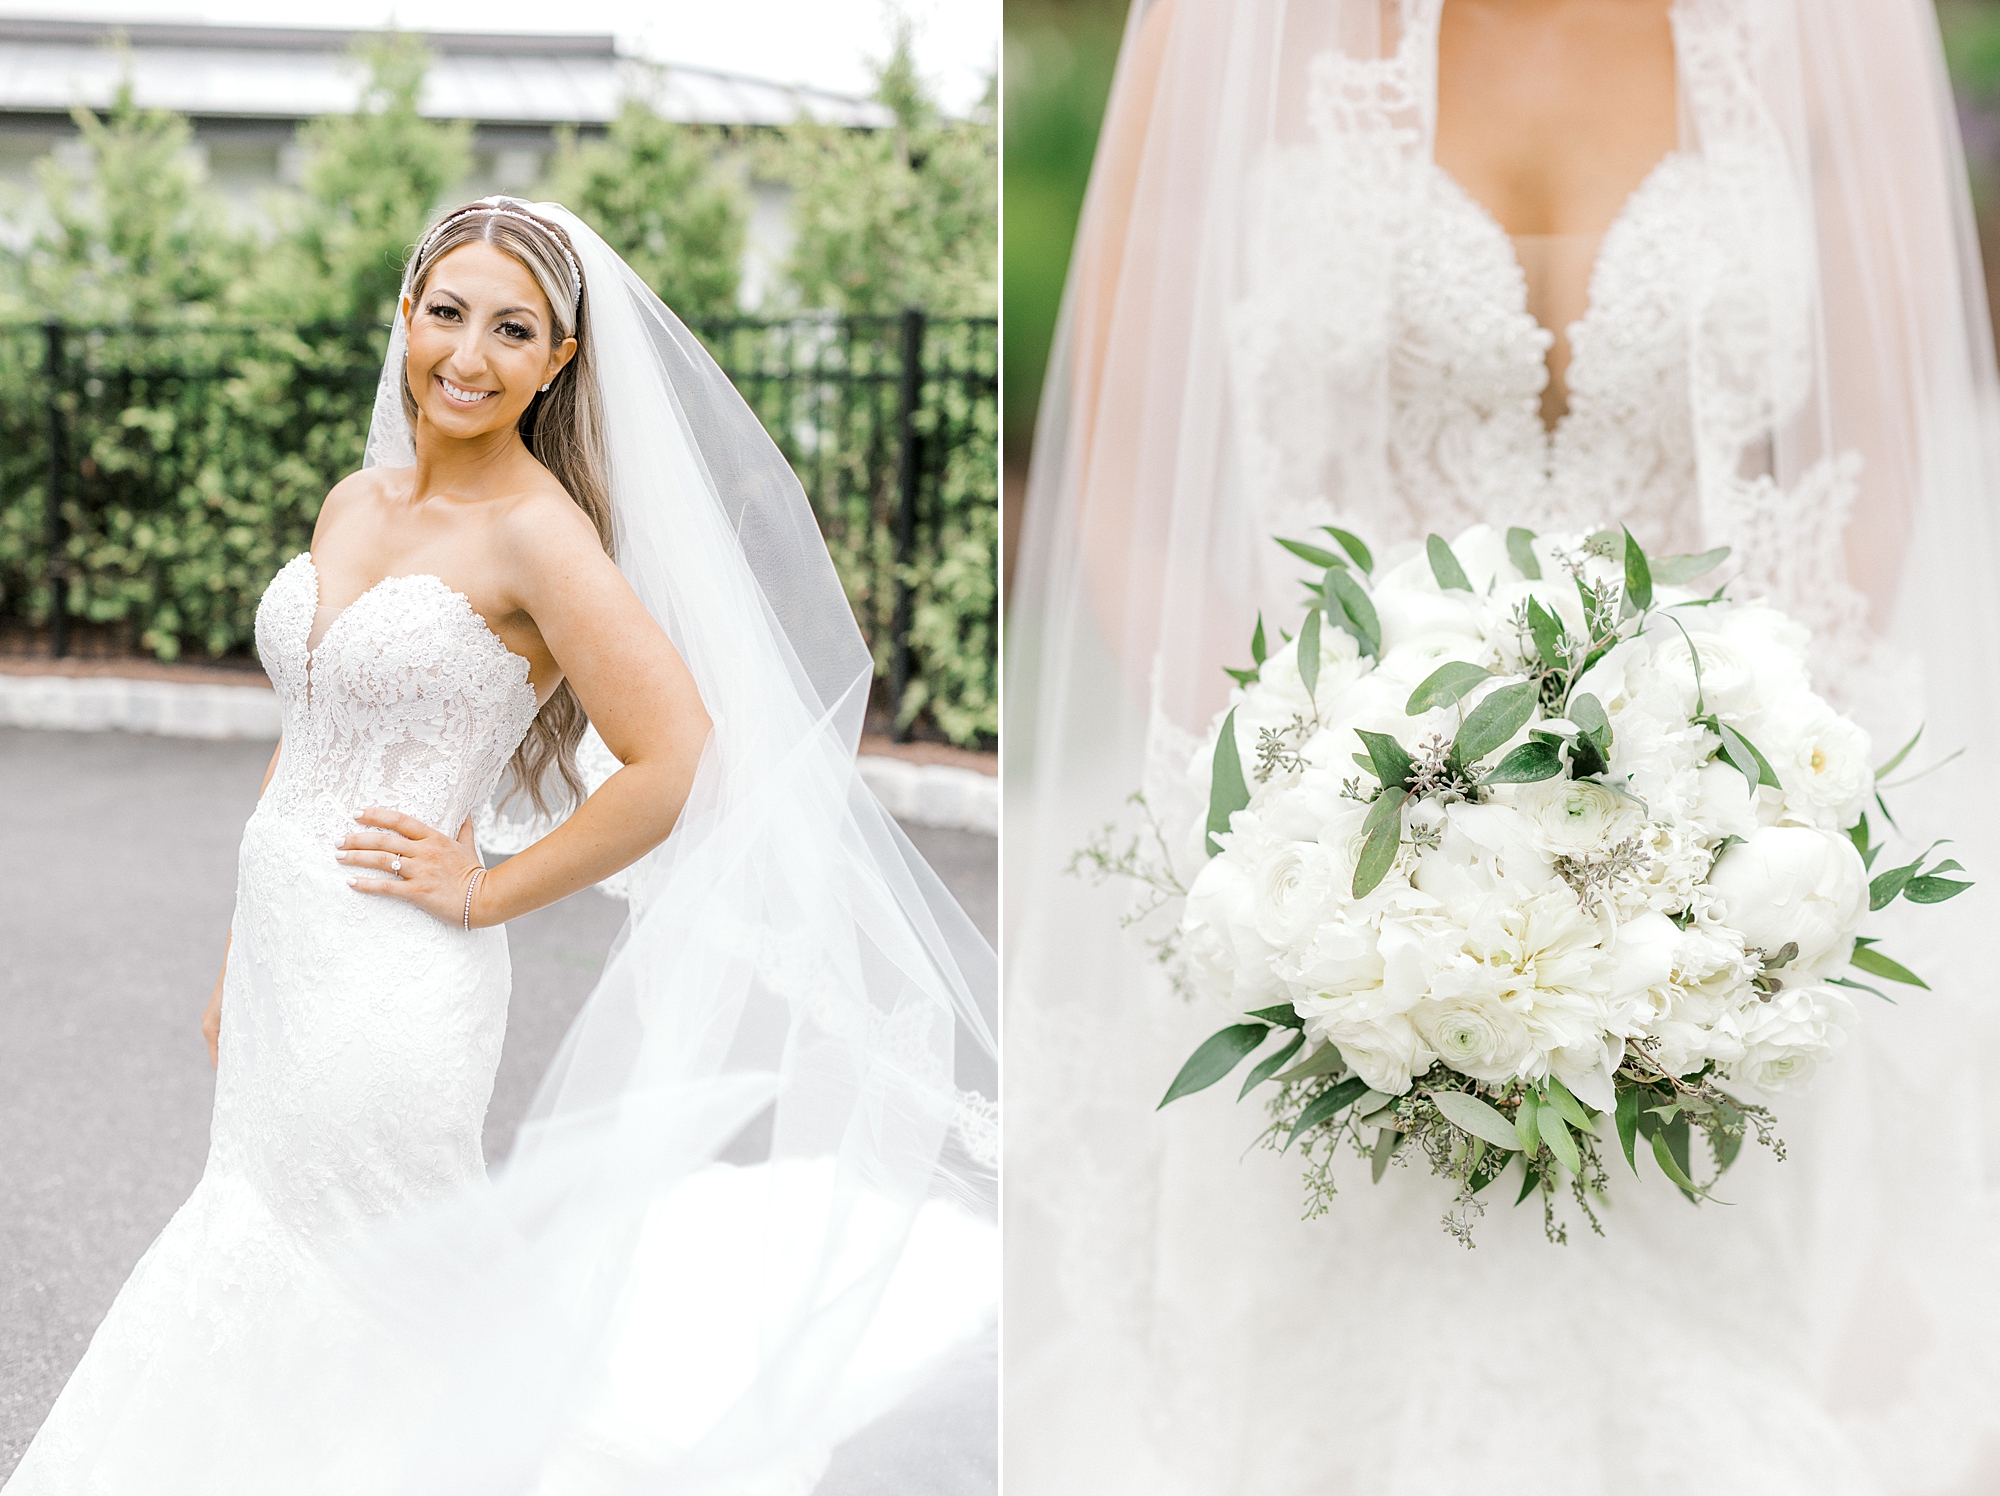 bride in sweetheart neckline strapless wedding gown poses with hand on hip